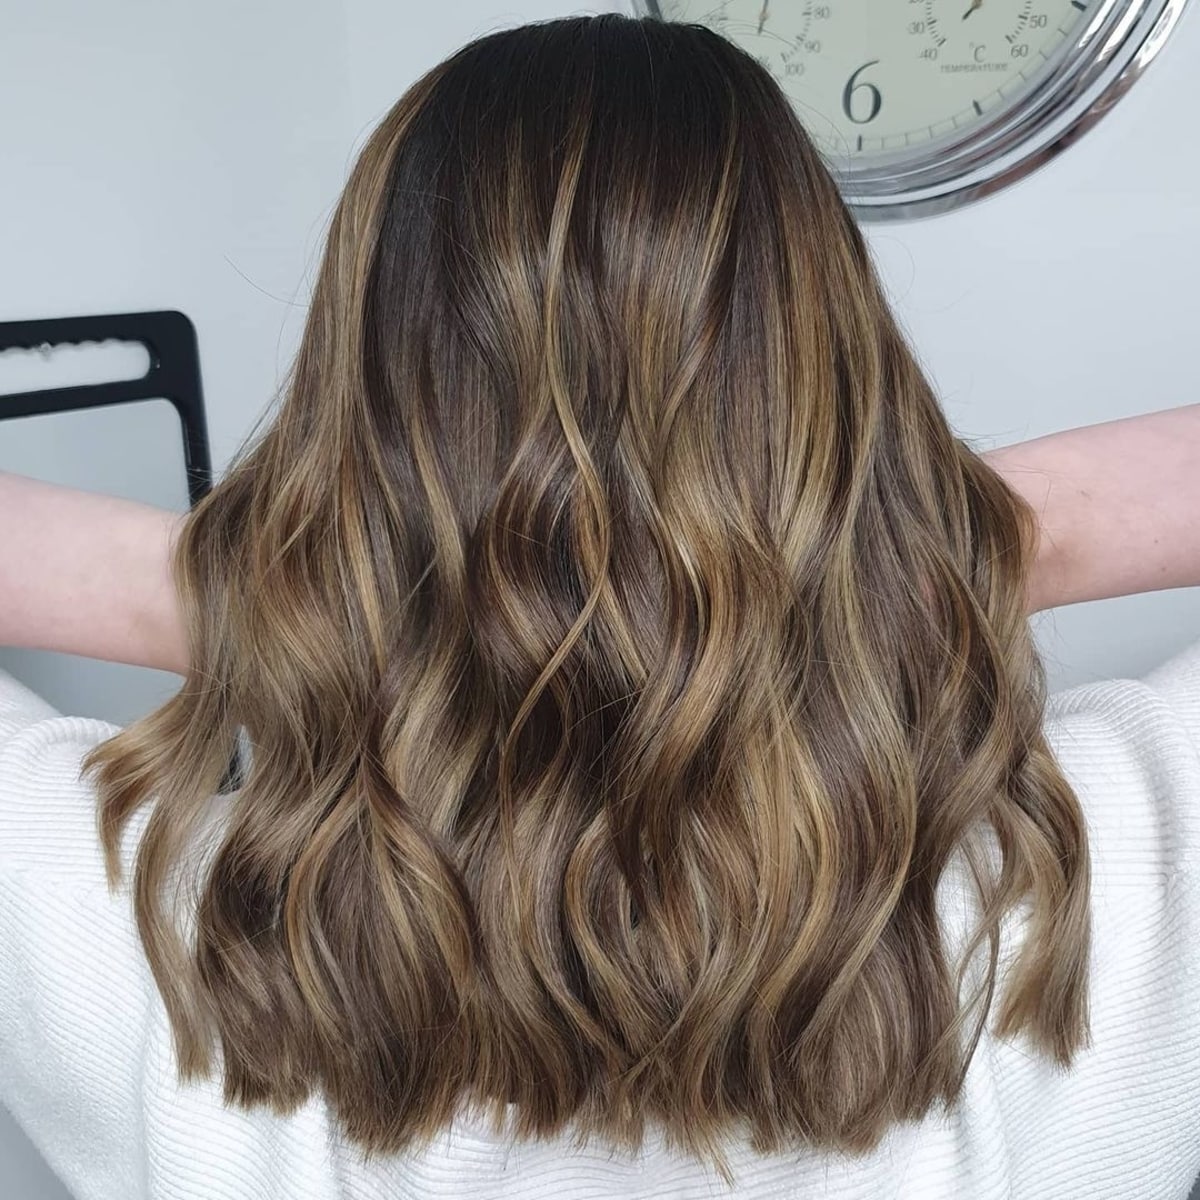 Ombre highlights for dark natural hair color